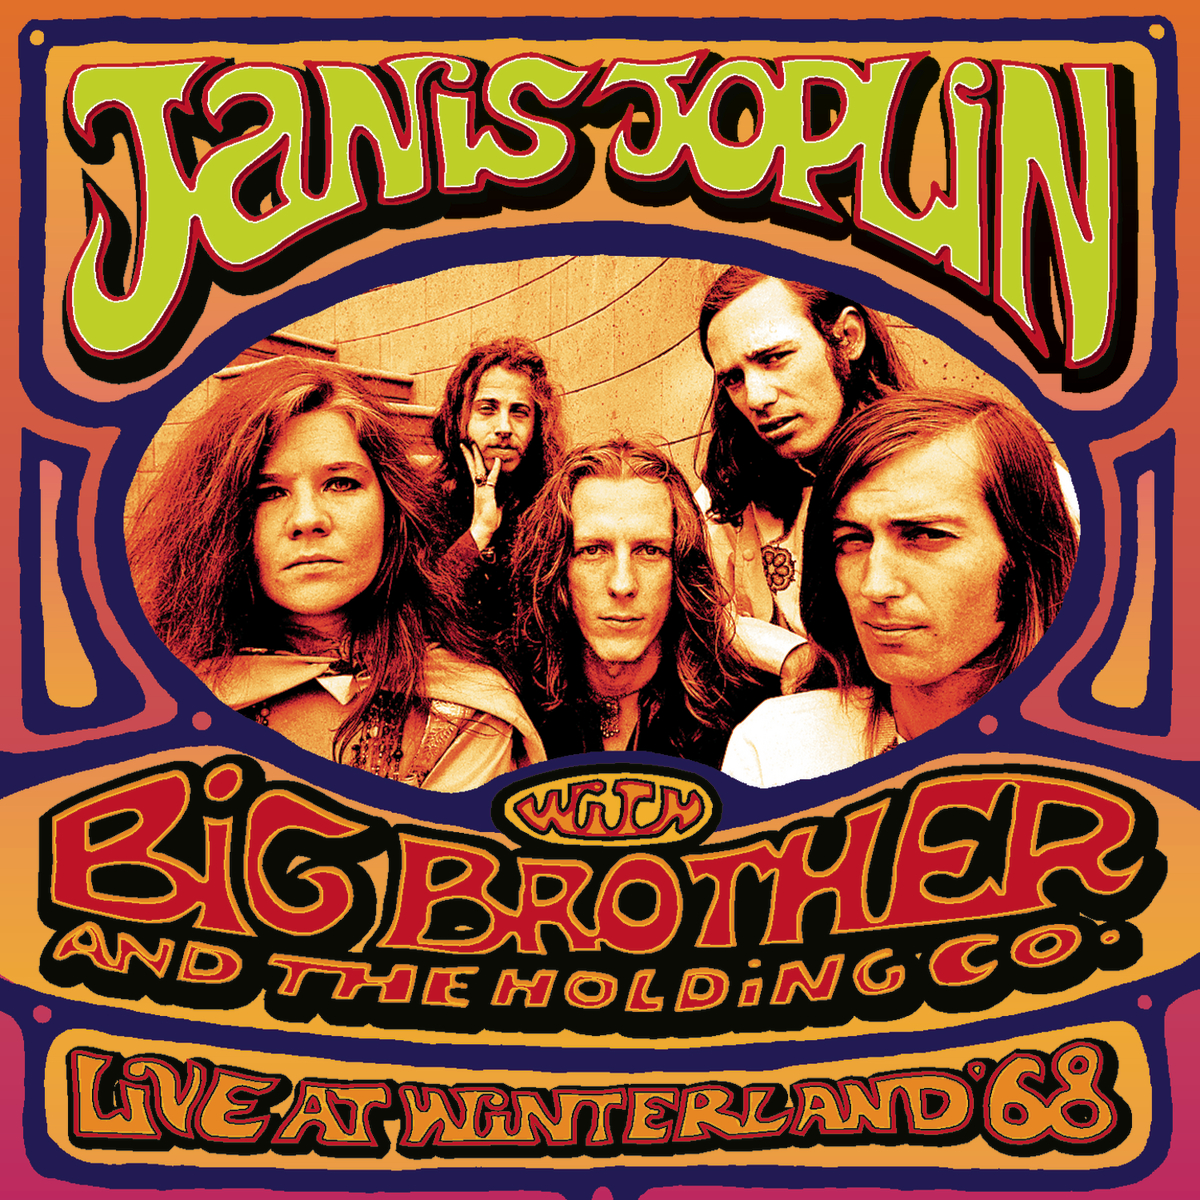 Big Brother & The Holding Company - Janis Joplin Live At Winterland '68